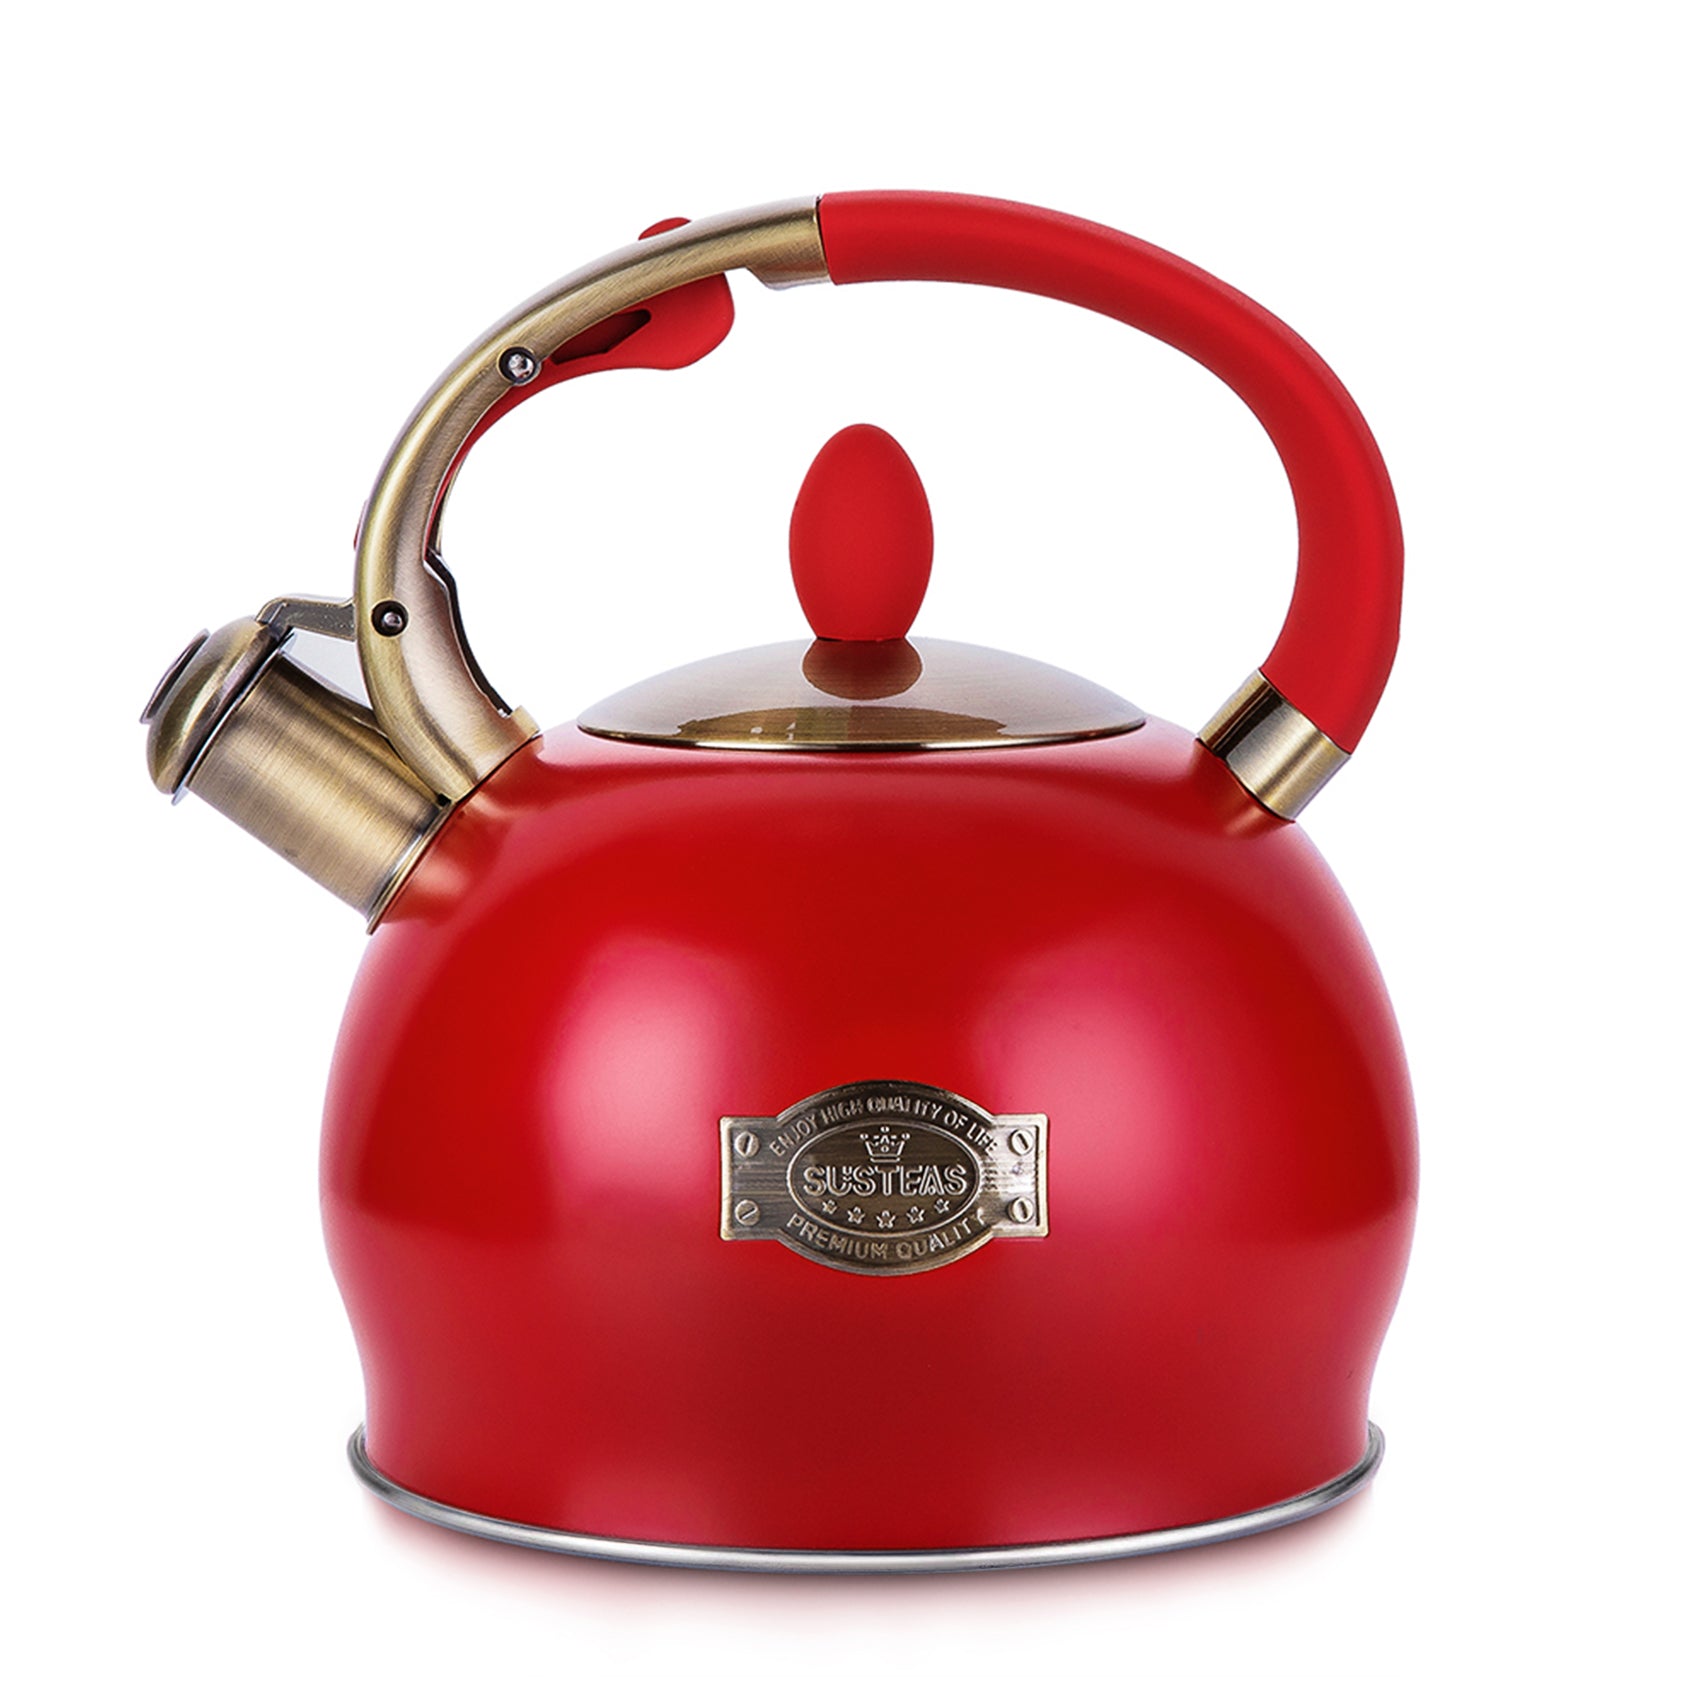 Hausroland Goodful Whistling Tea Kettle Stove Top Stainless Steel